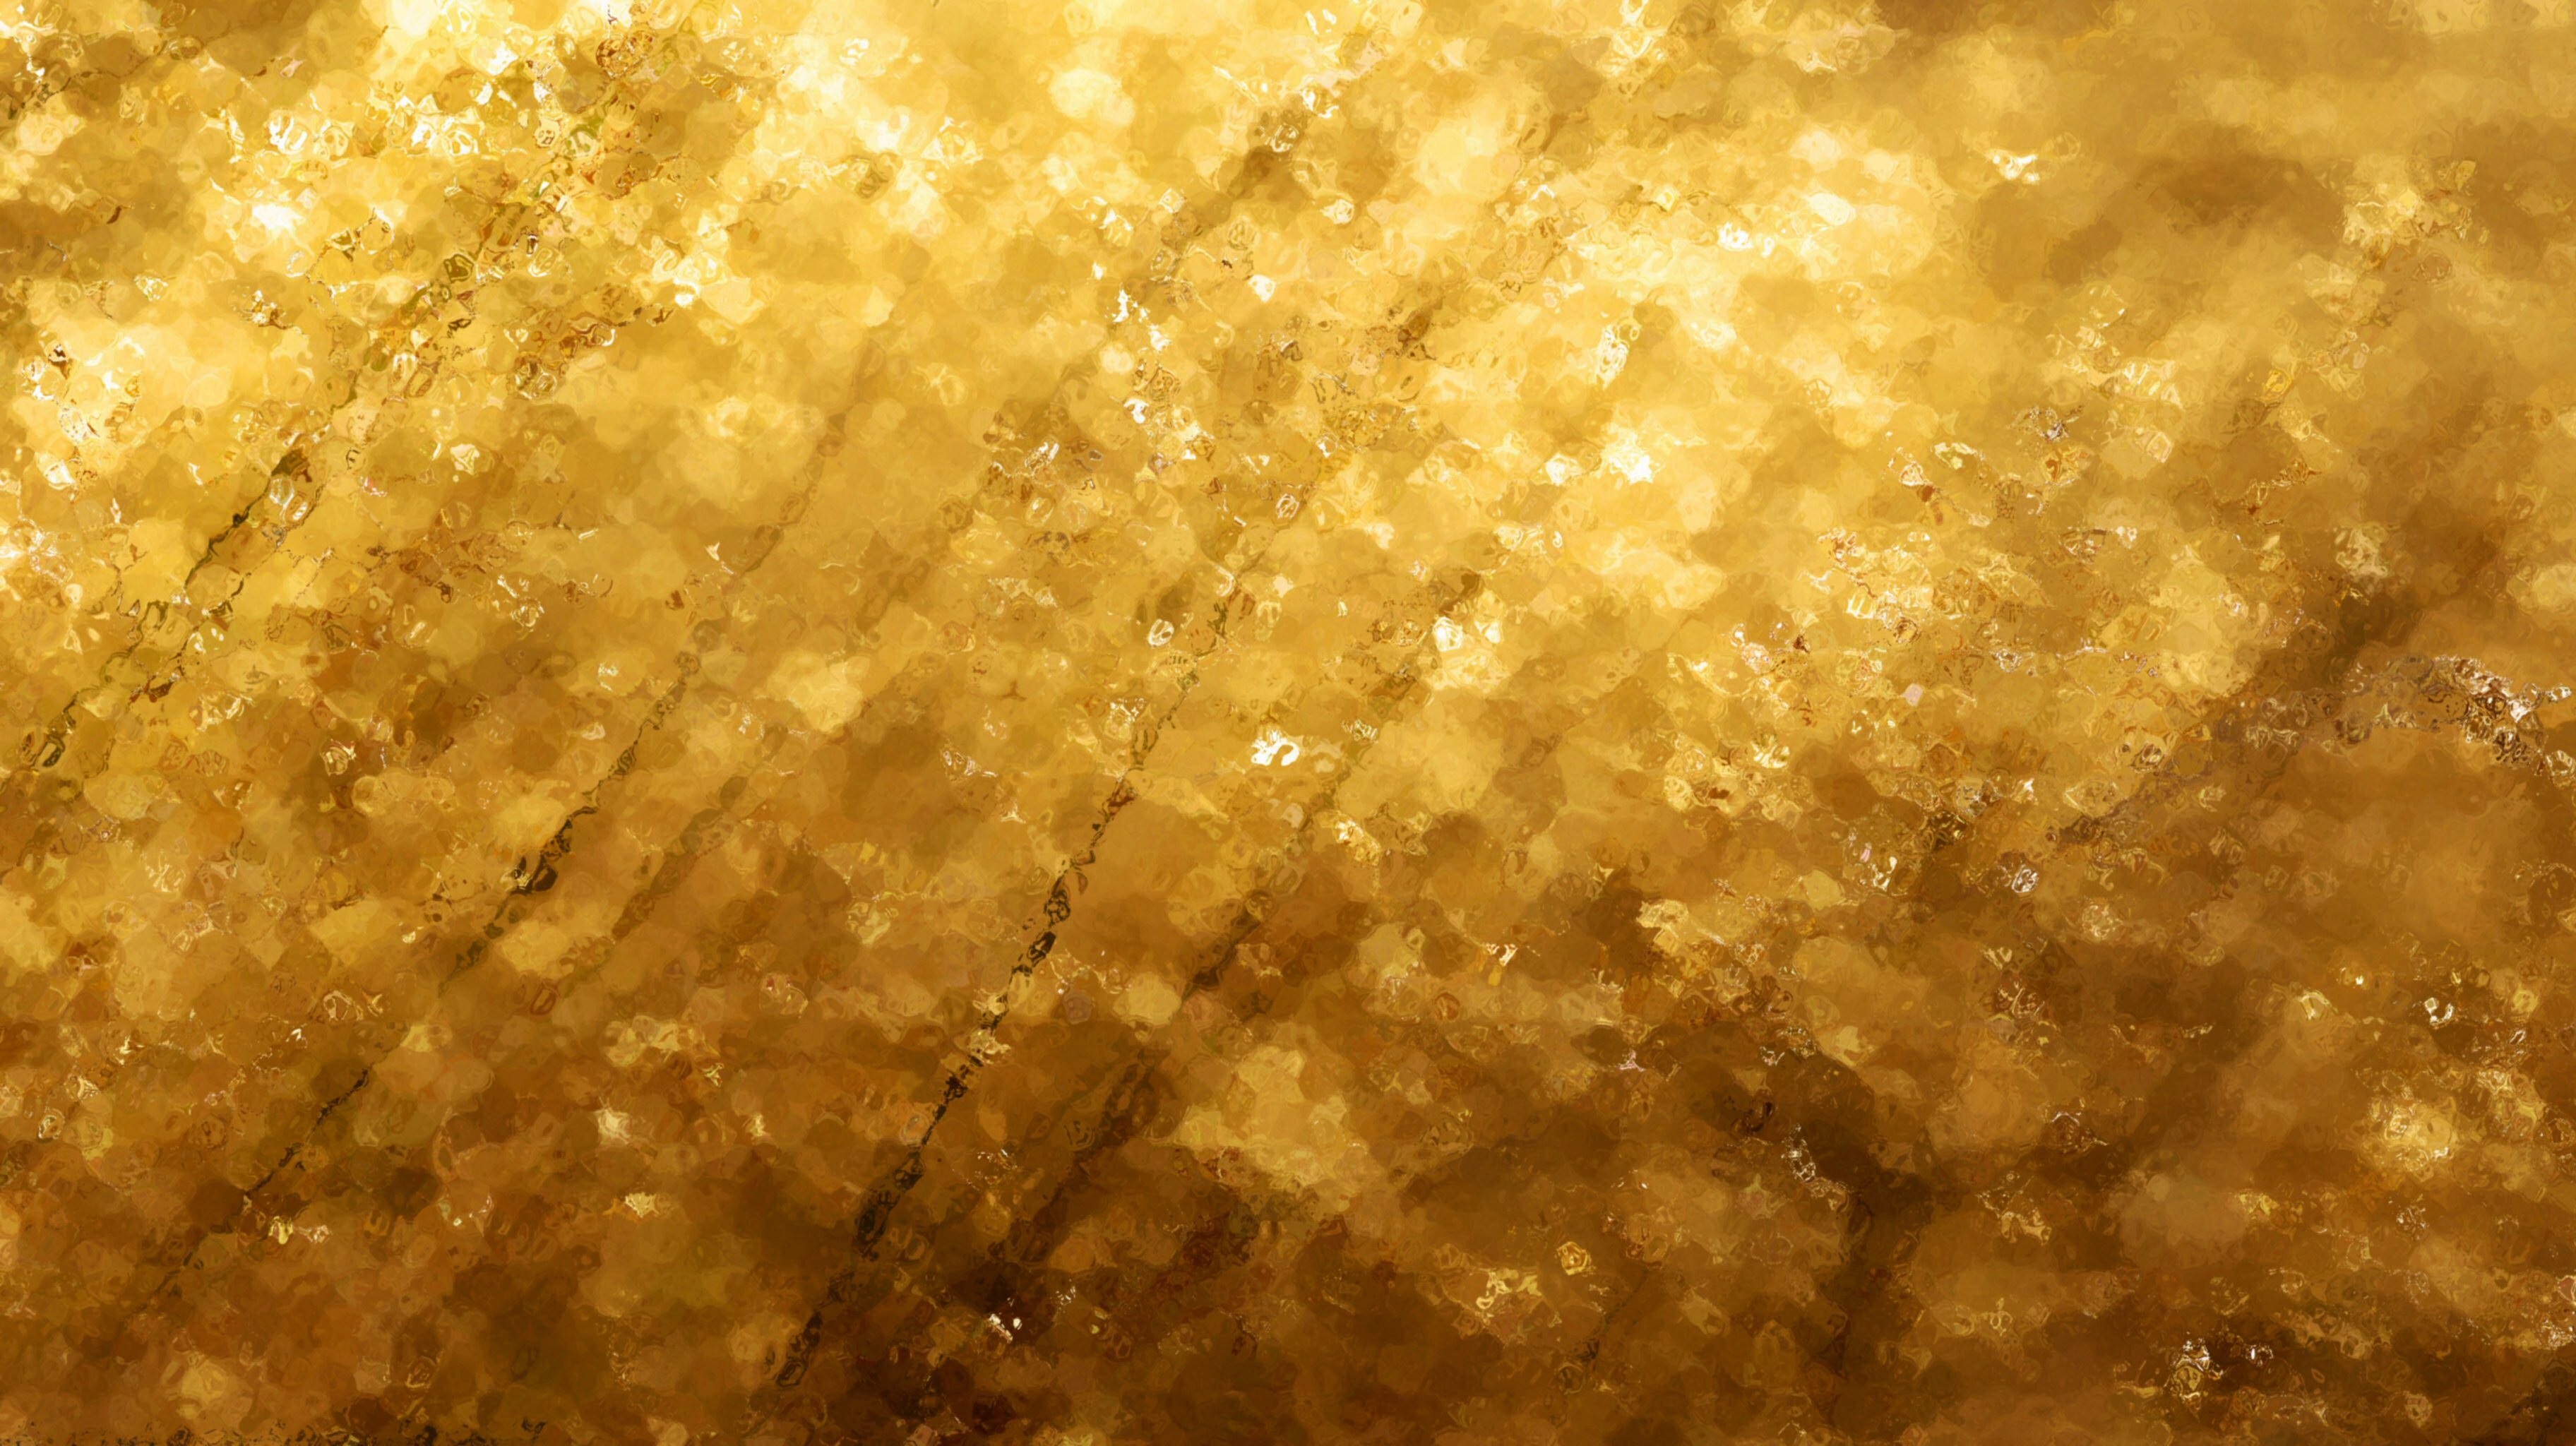 Free photo: Gold Texture - Abstract, Gold, Graphic - Free ...